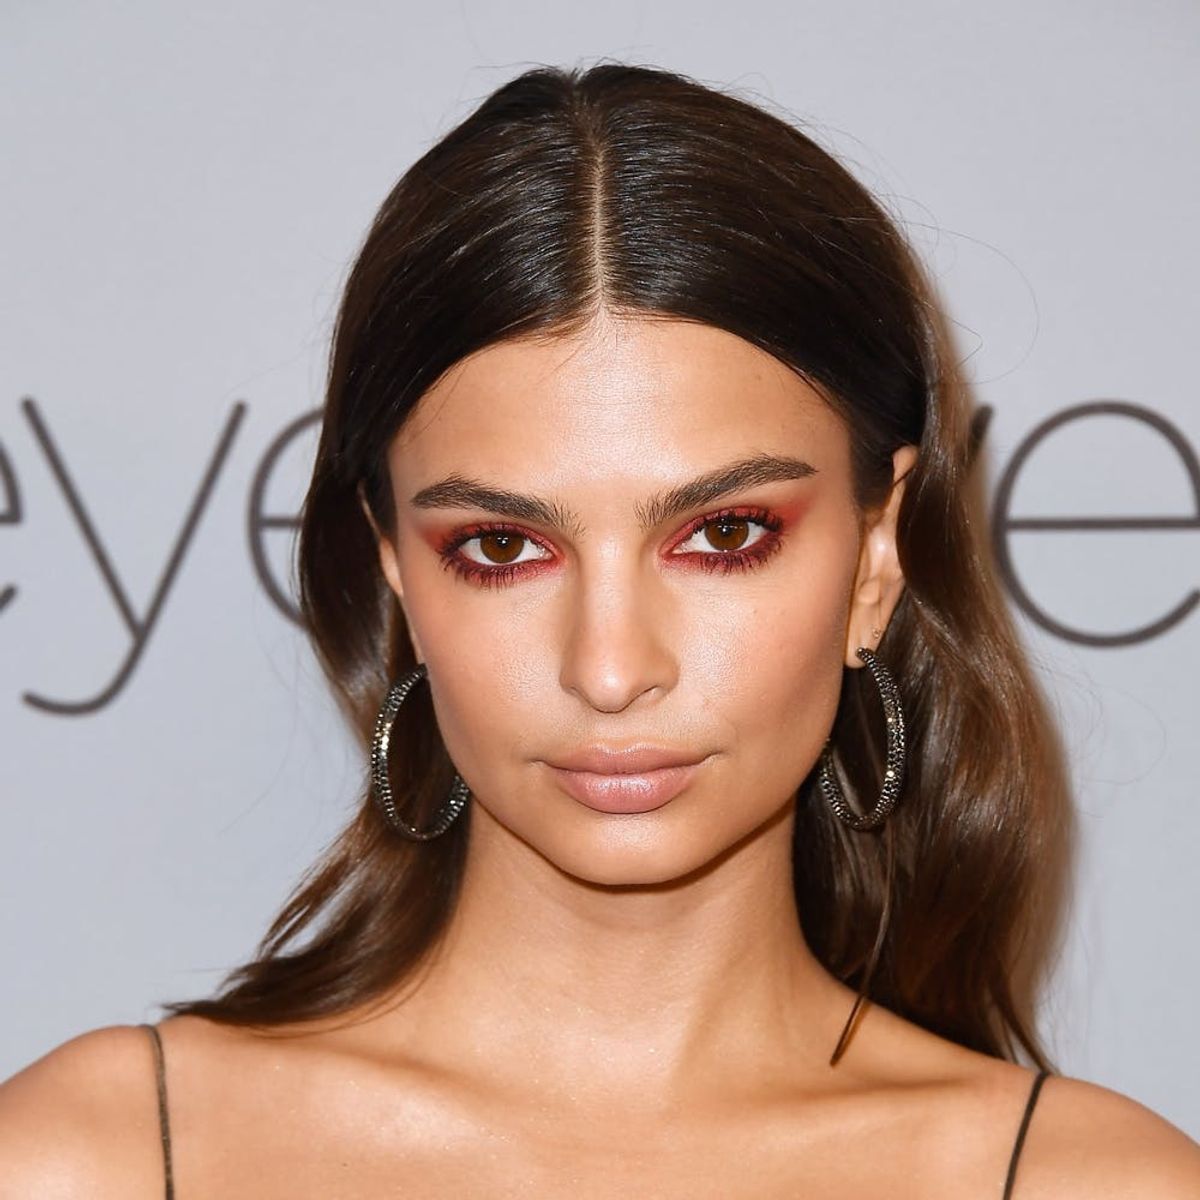 People Are Peeved at Emily Ratajkowski Over *This* Comment About Her New Hair Campaign